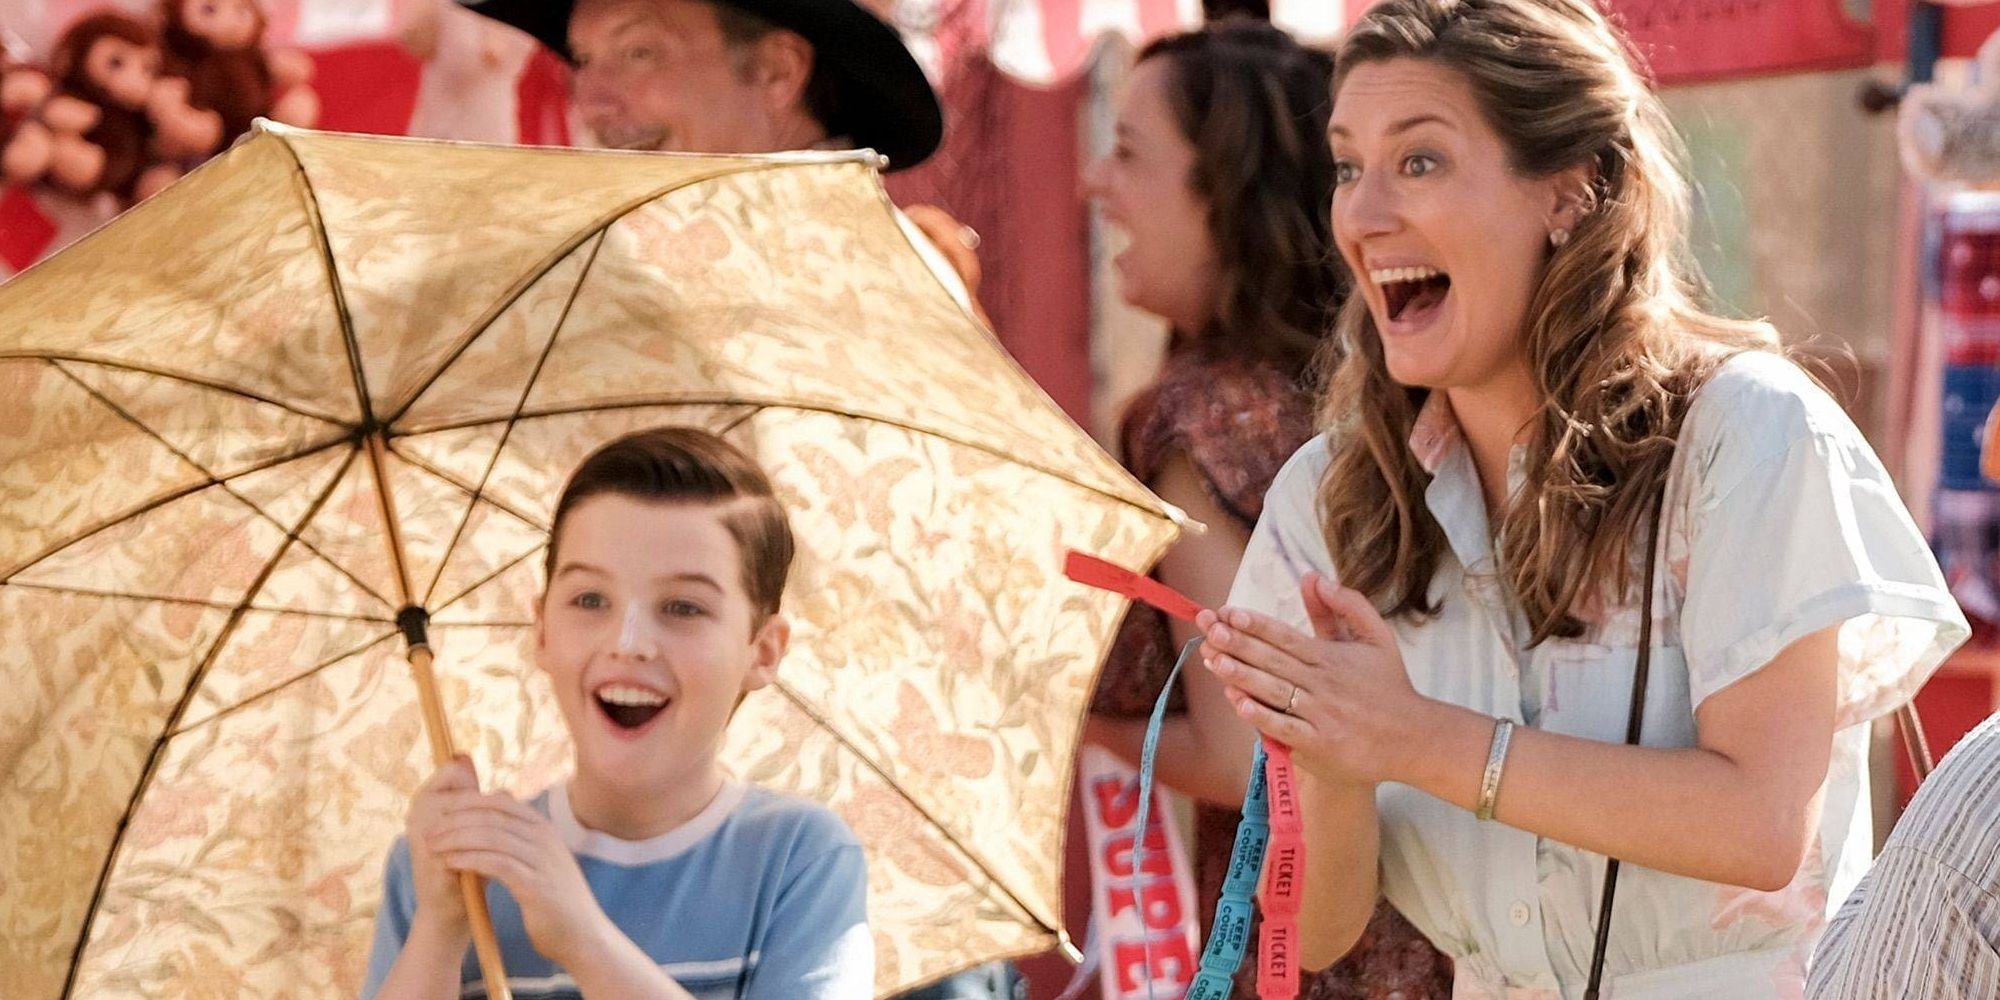 Mary and Sheldon cheering at the carnival in Young Sheldon